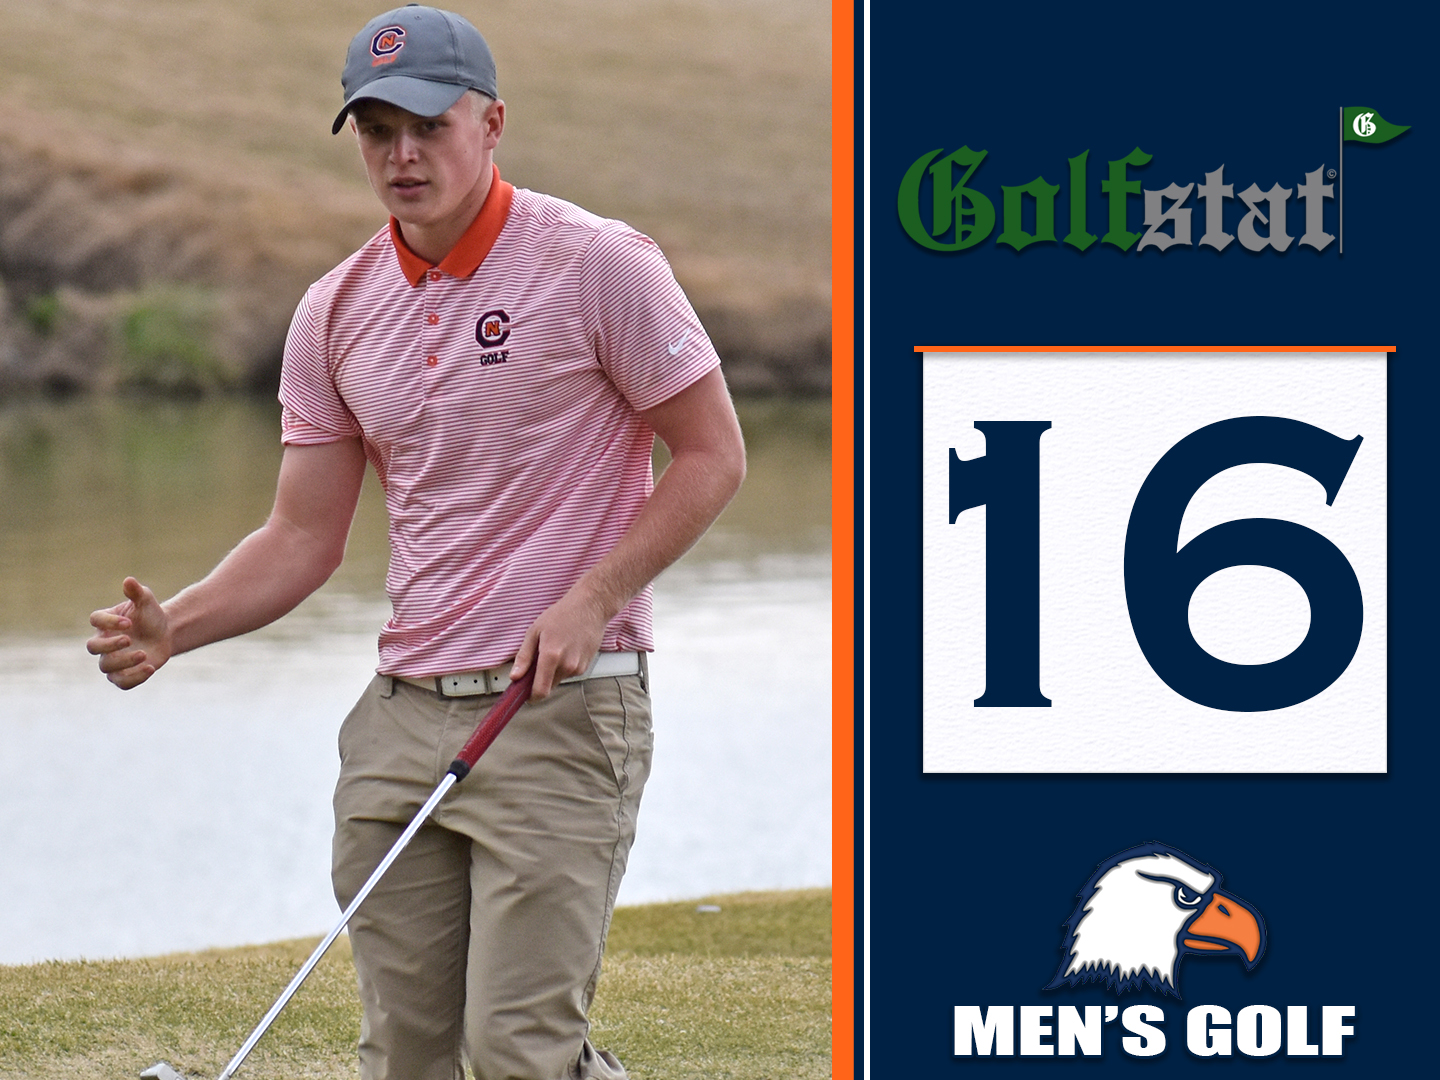 Eagles soar to No. 16 in latest Golfstat ranking